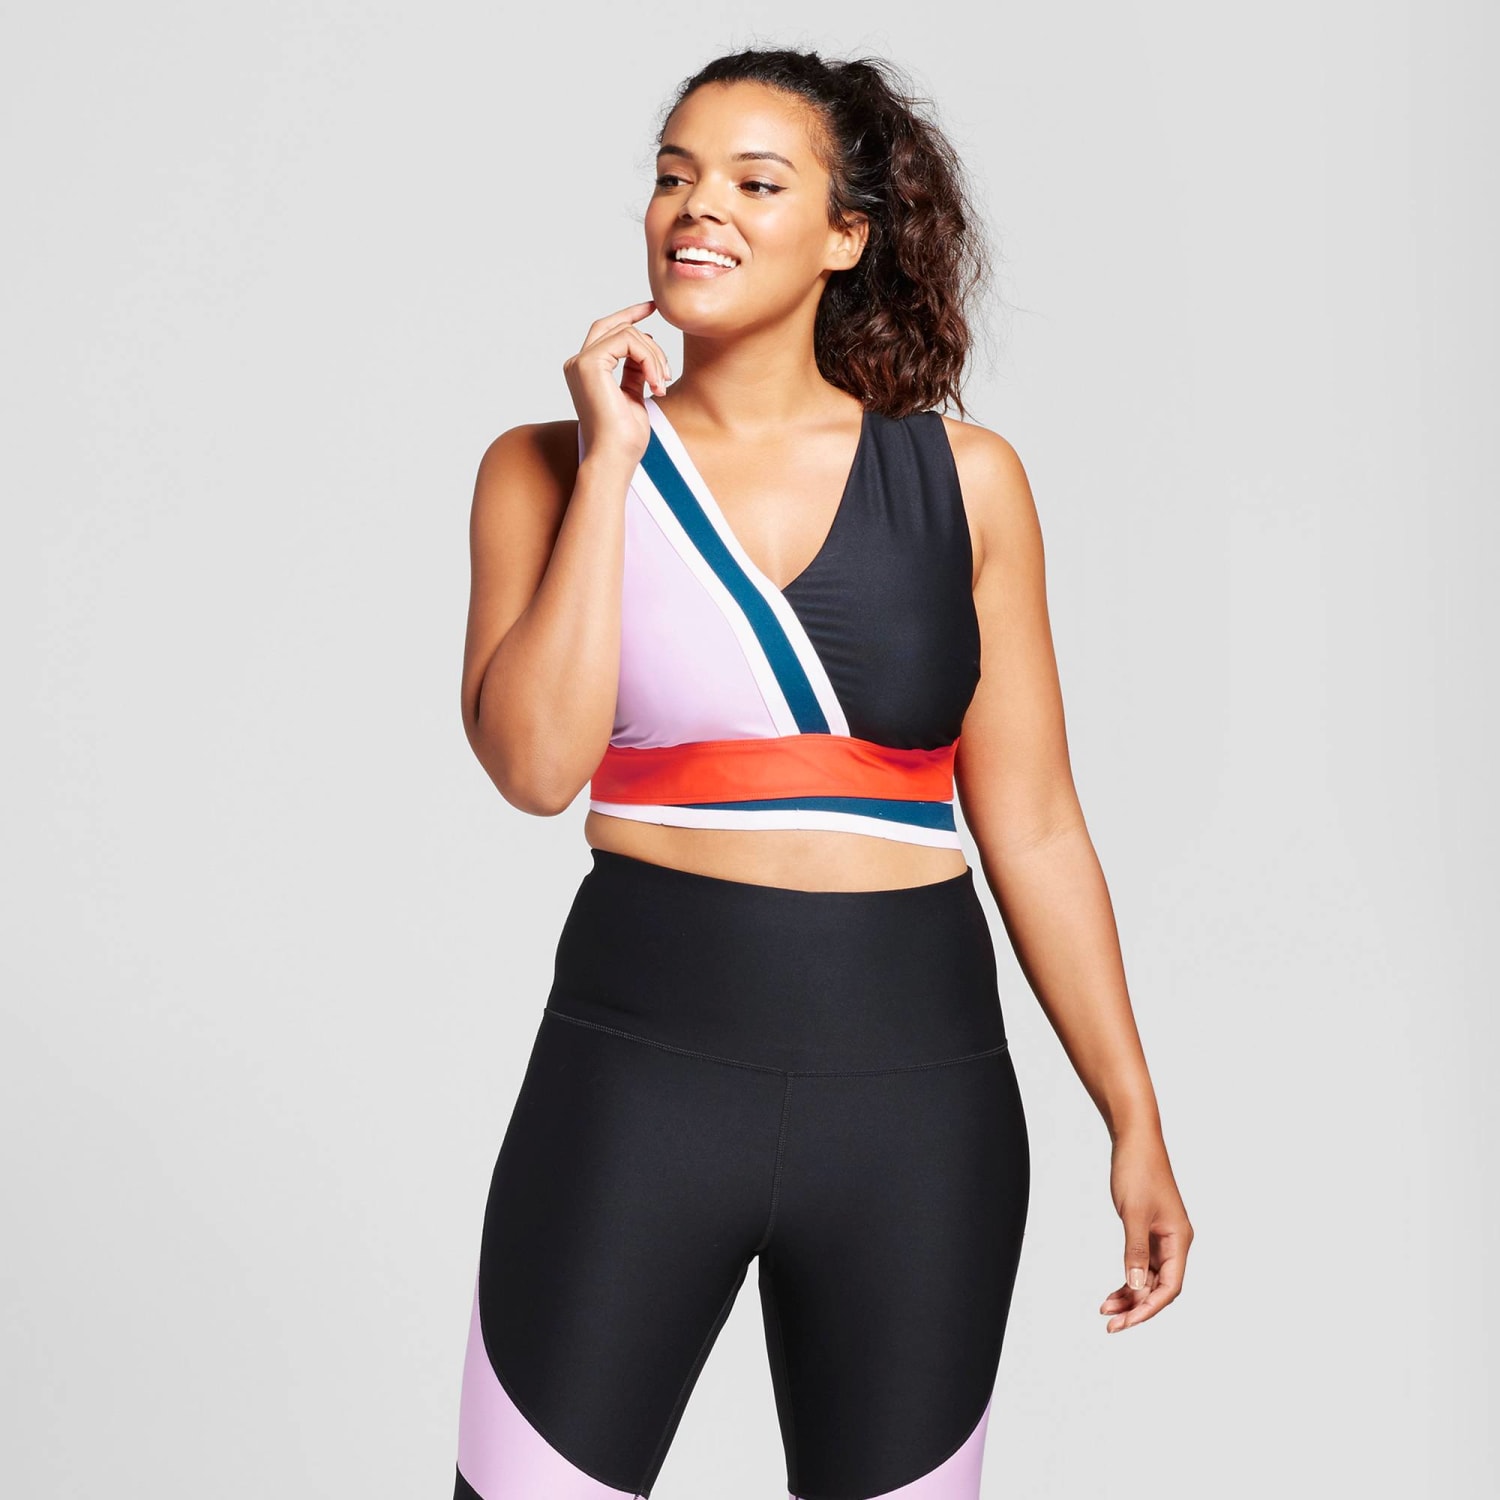 Cheap Target Activewear // JoyLab Review & Try On 